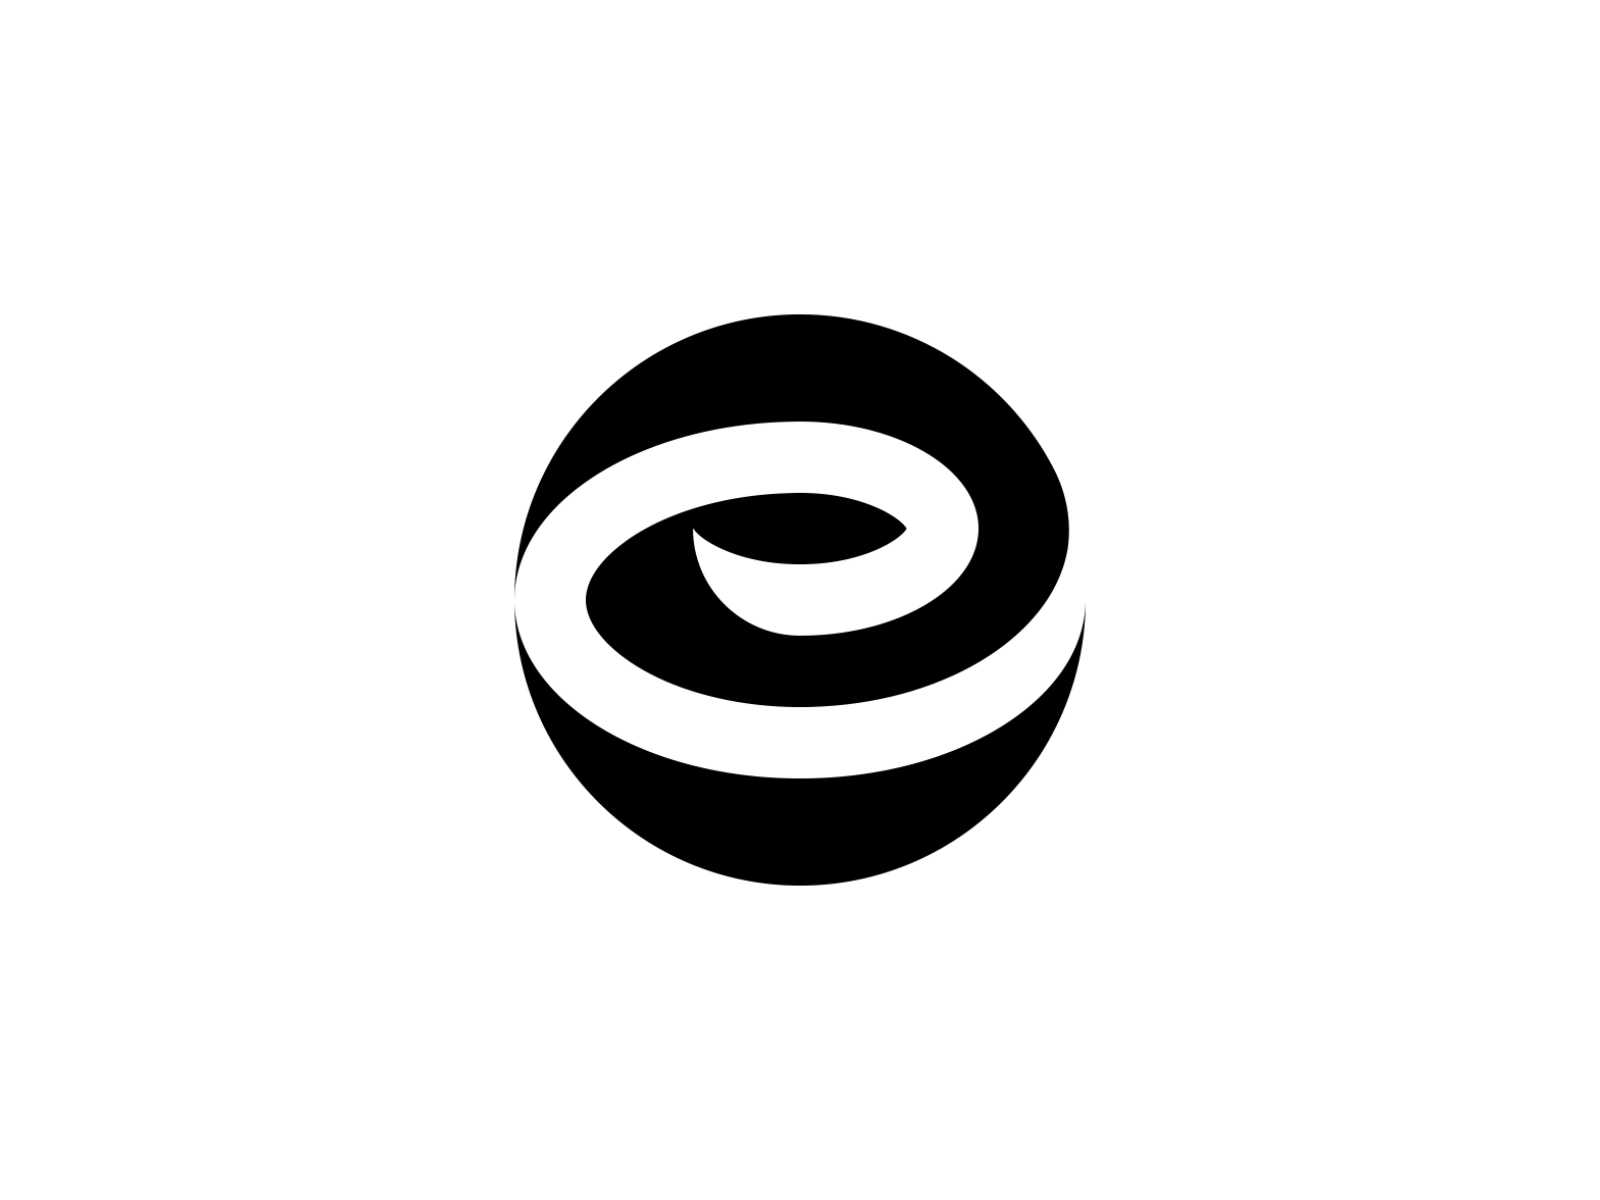 Letter E logo - How to make a simple logo with golden ratio by DAINOGO ...